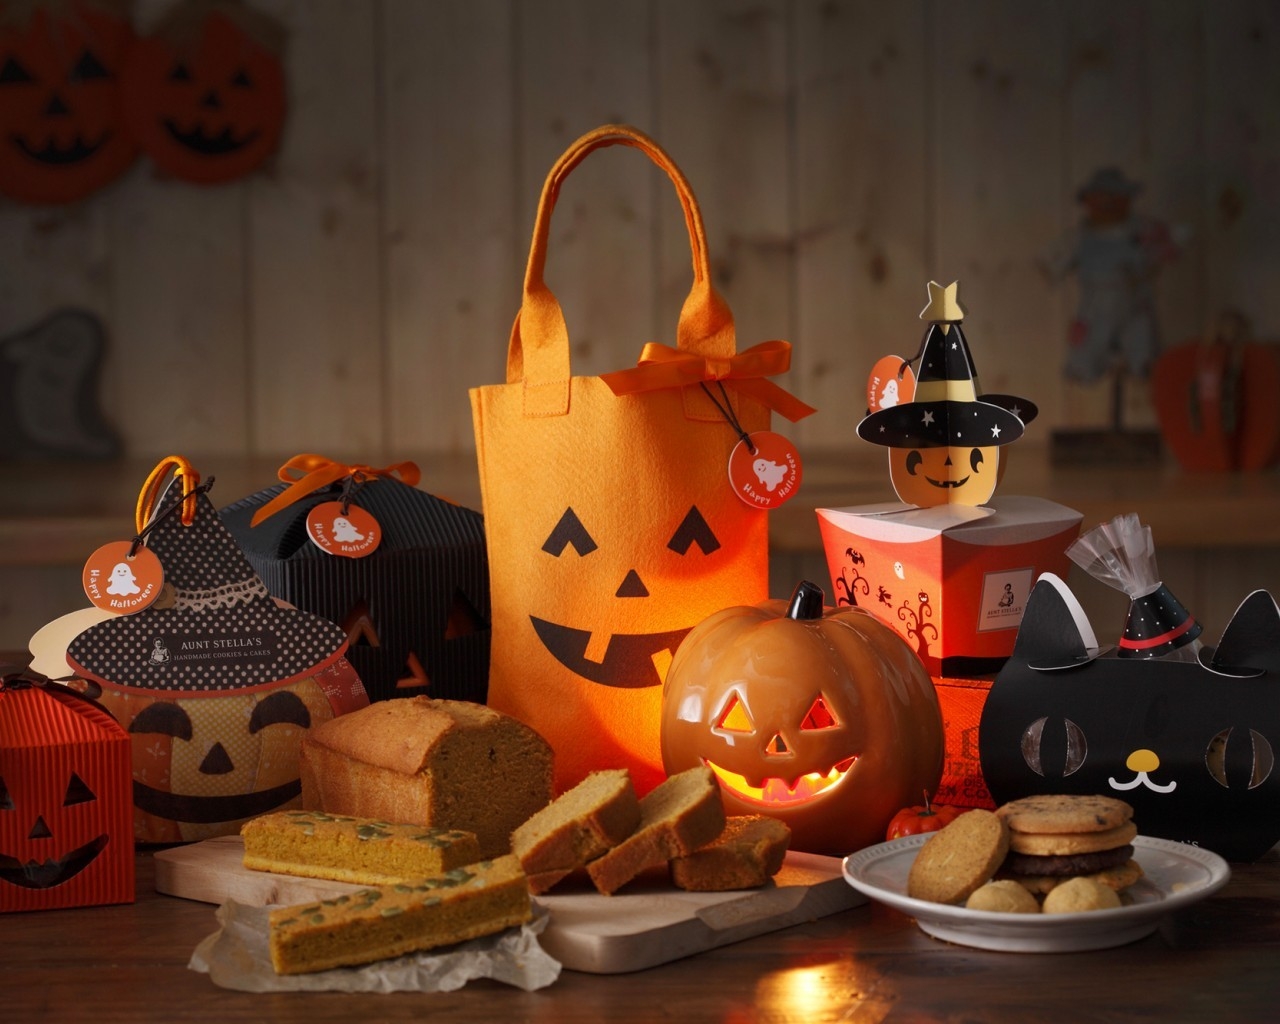 Halloween Meal for 1280 x 1024 resolution